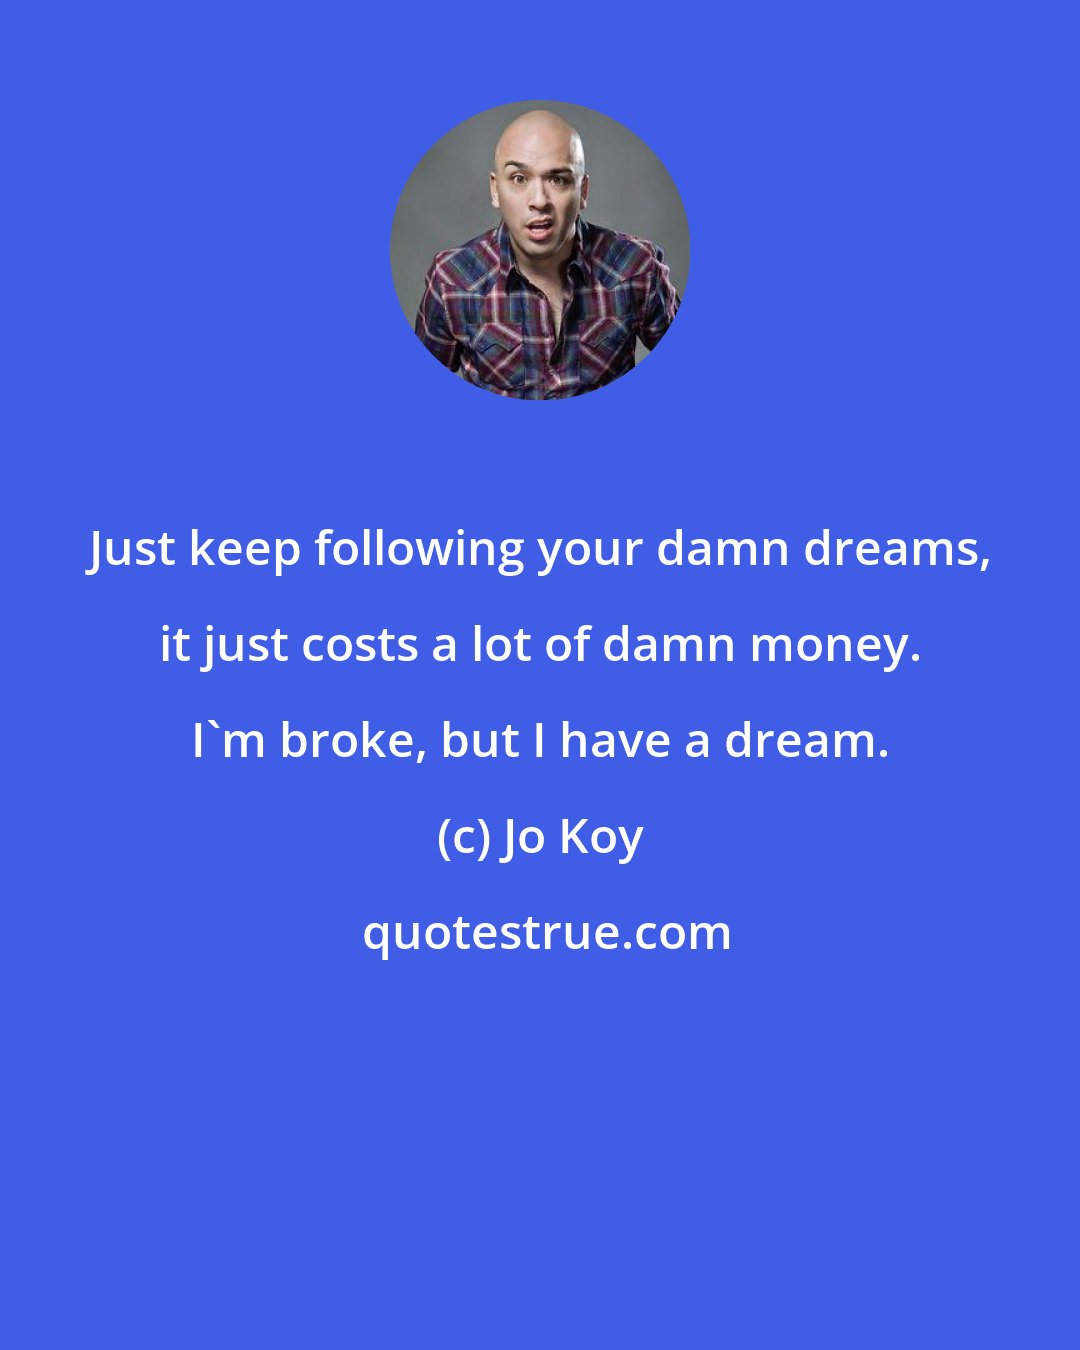 Jo Koy: Just keep following your damn dreams, it just costs a lot of damn money. I'm broke, but I have a dream.